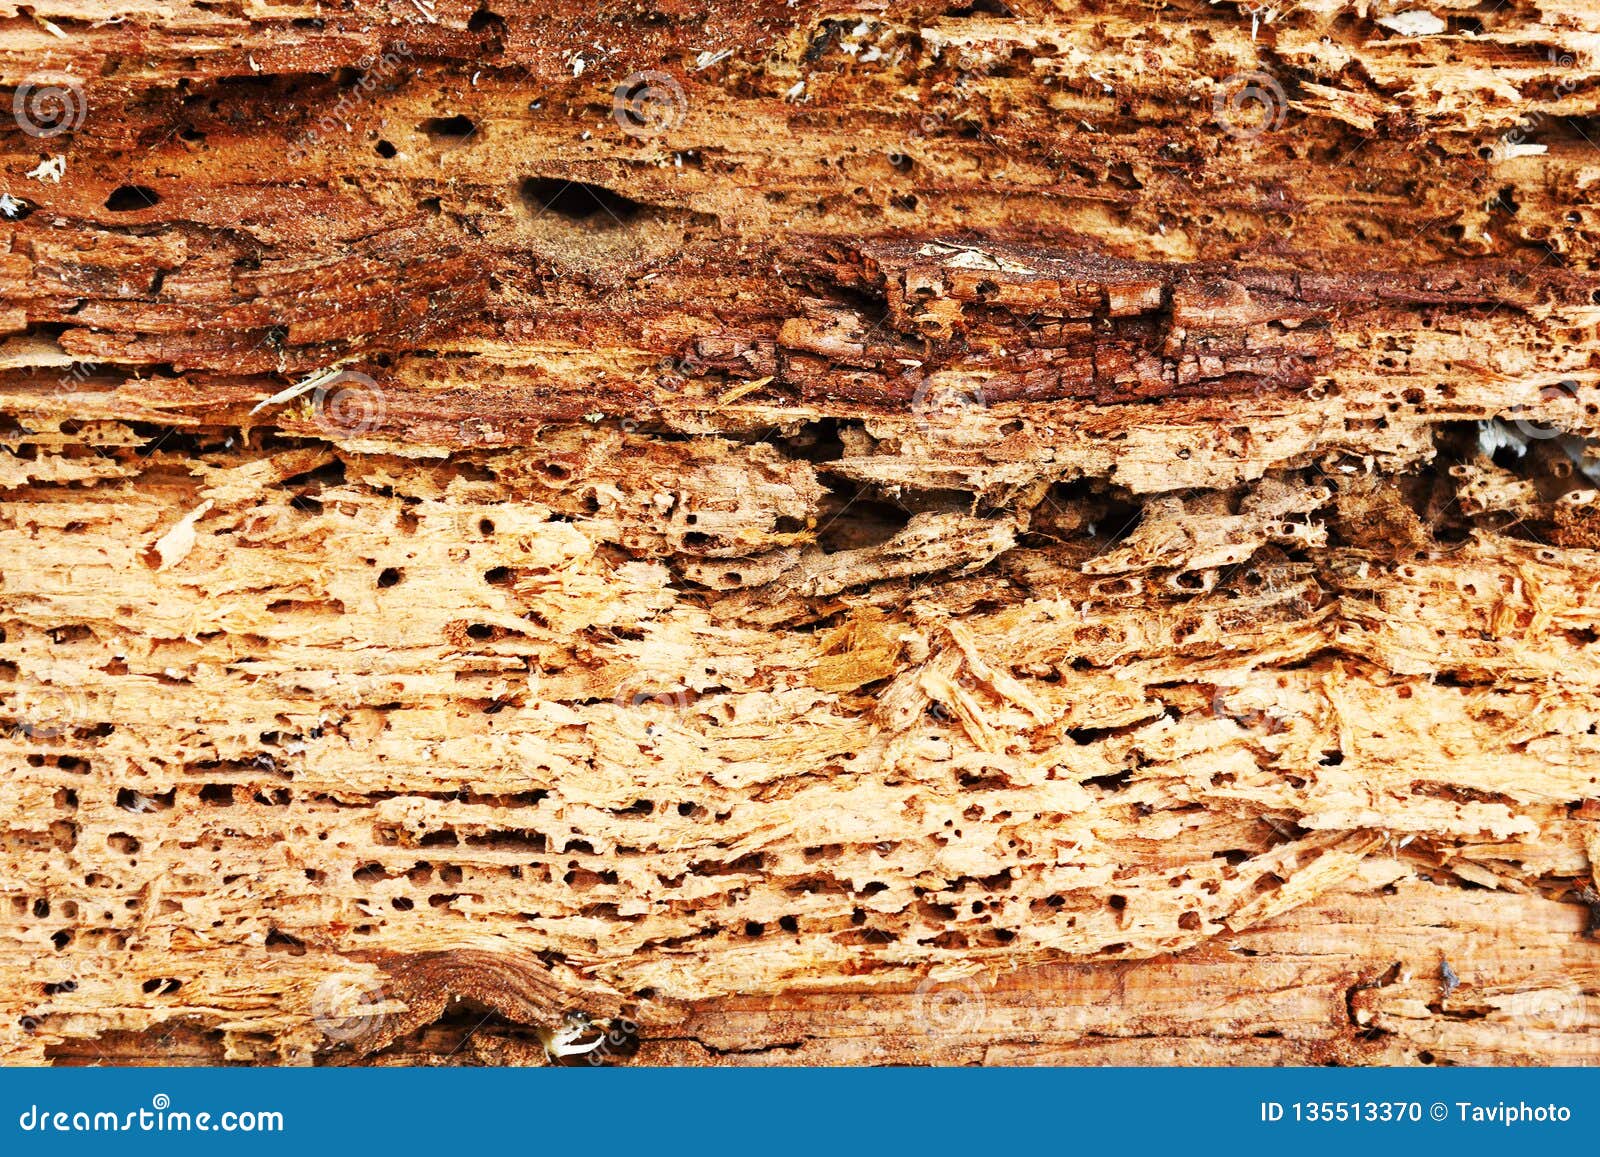 Rough Texture Of Wood Destroyed By Boring Insects Stock Photo